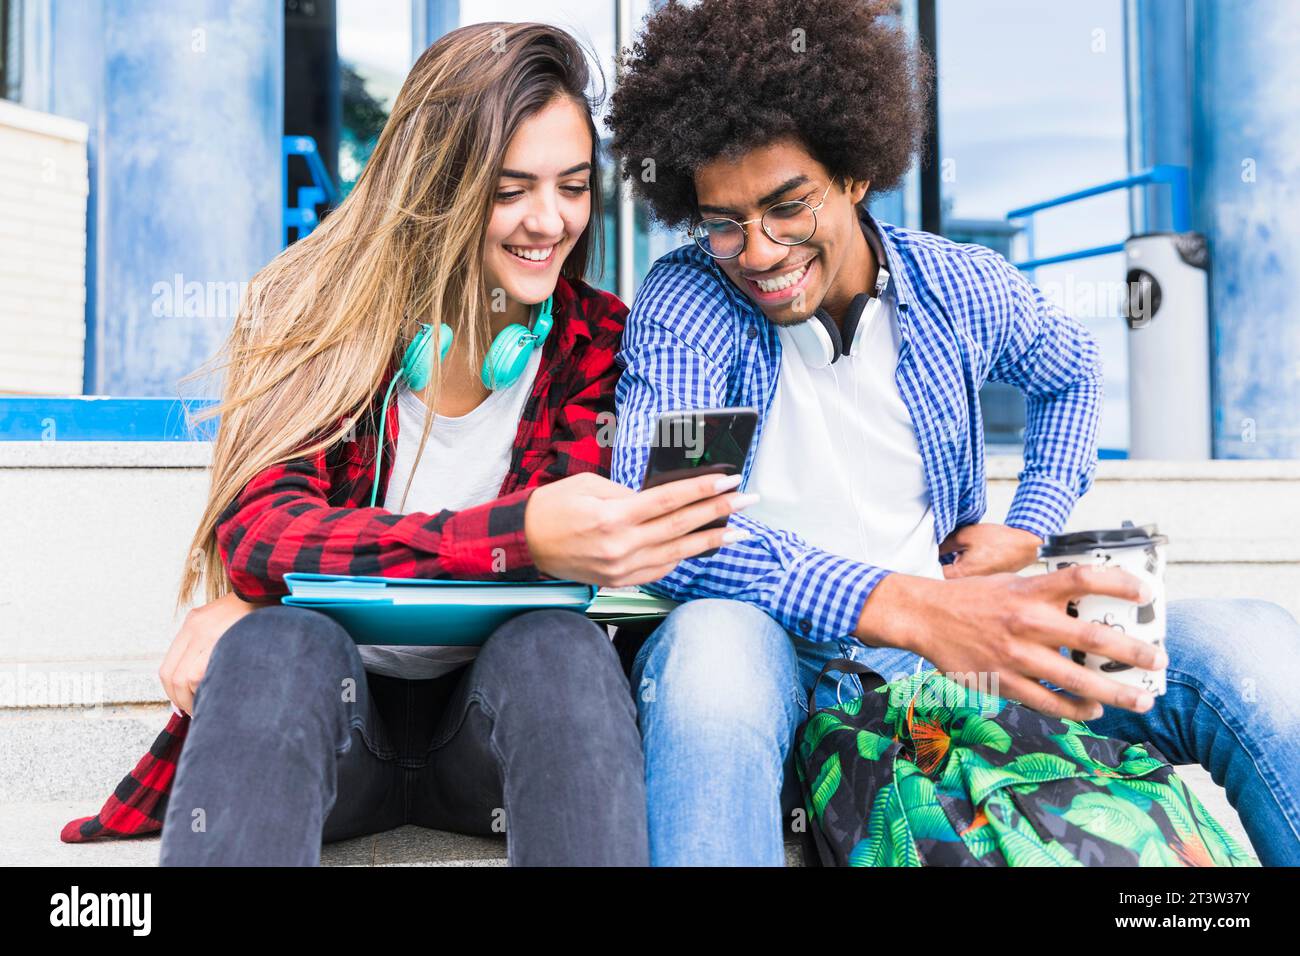 Portrait smiling diverse young students looking mobile phone Stock Photo